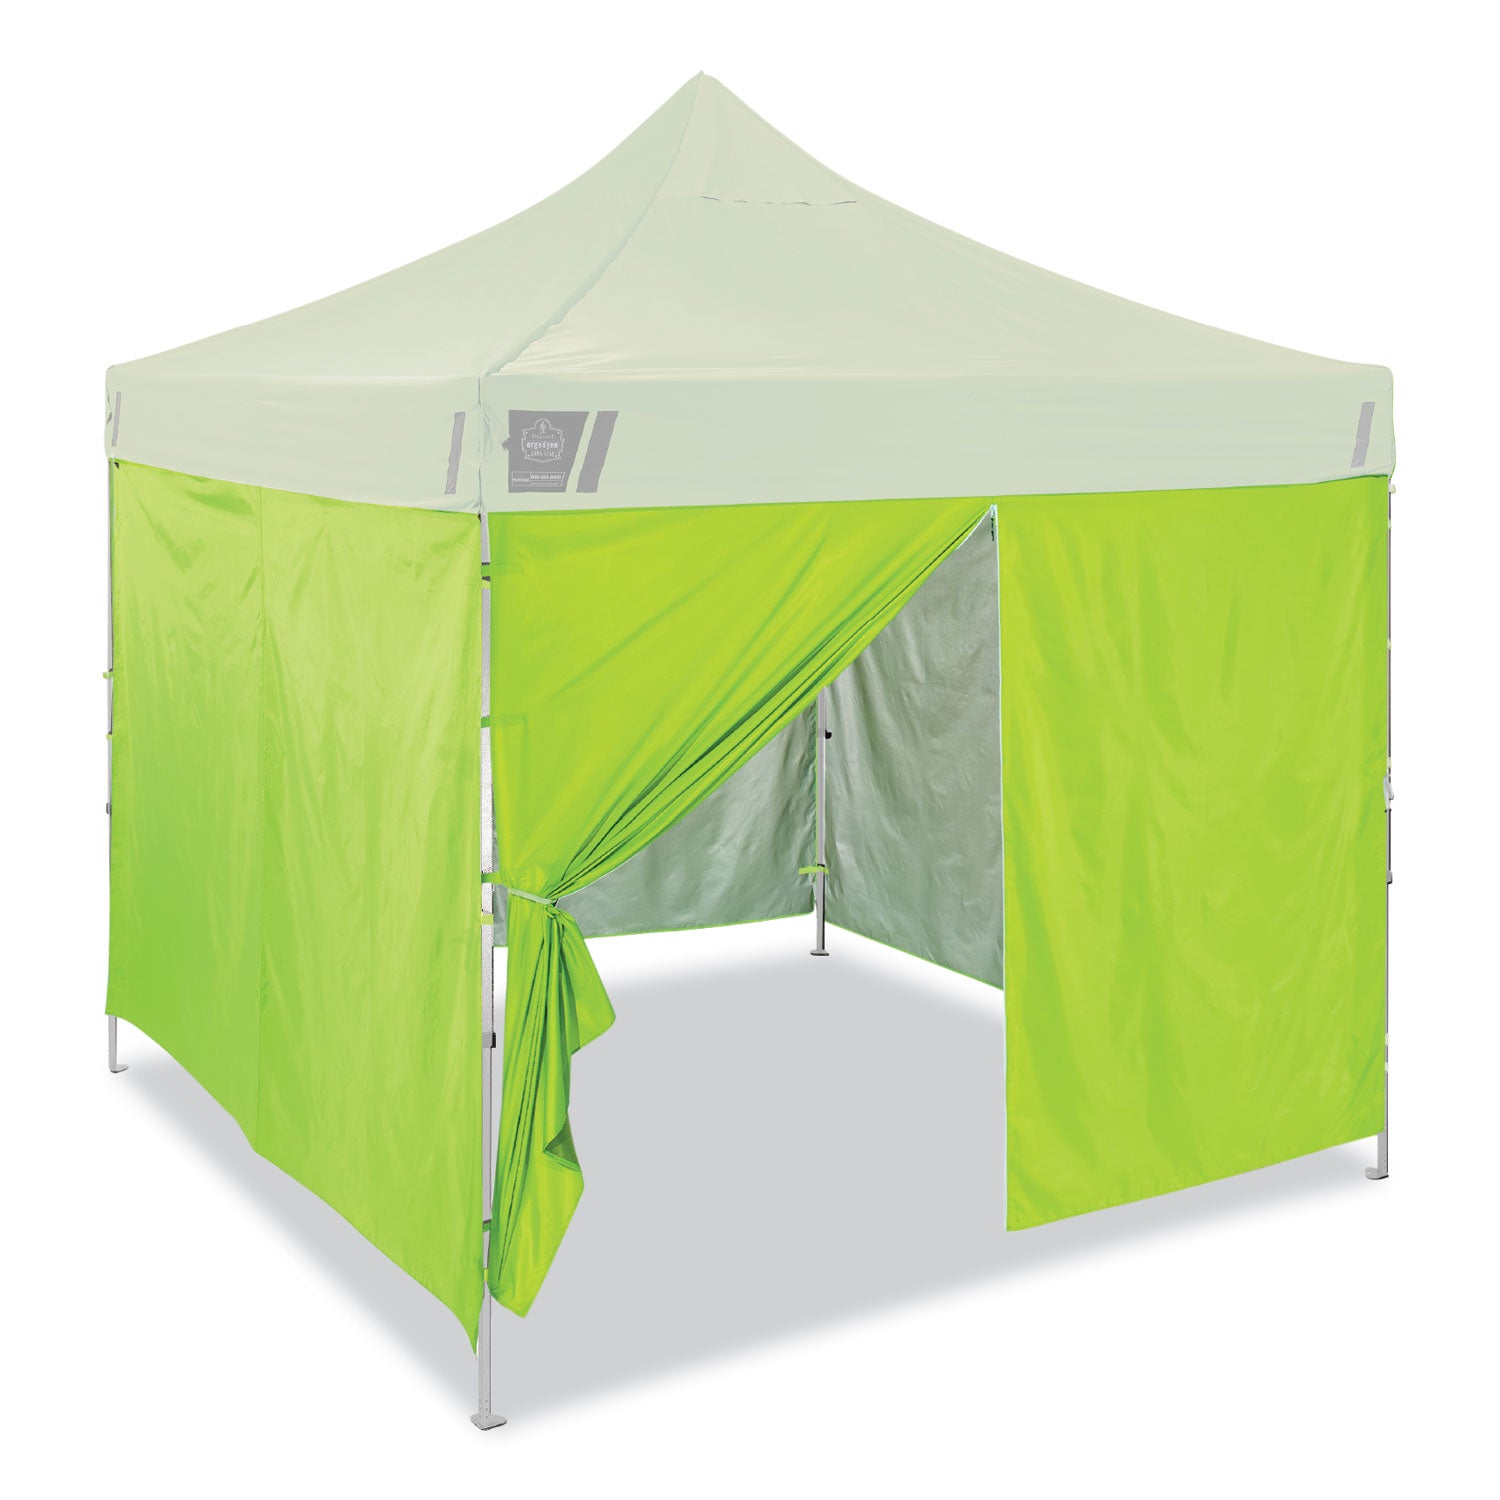 shax-6054-pop-up-tent-sidewall-kit-single-skin-10-ft-x-10-ft-polyester-lime-ships-in-1-3-business-days_ego12984 - 1